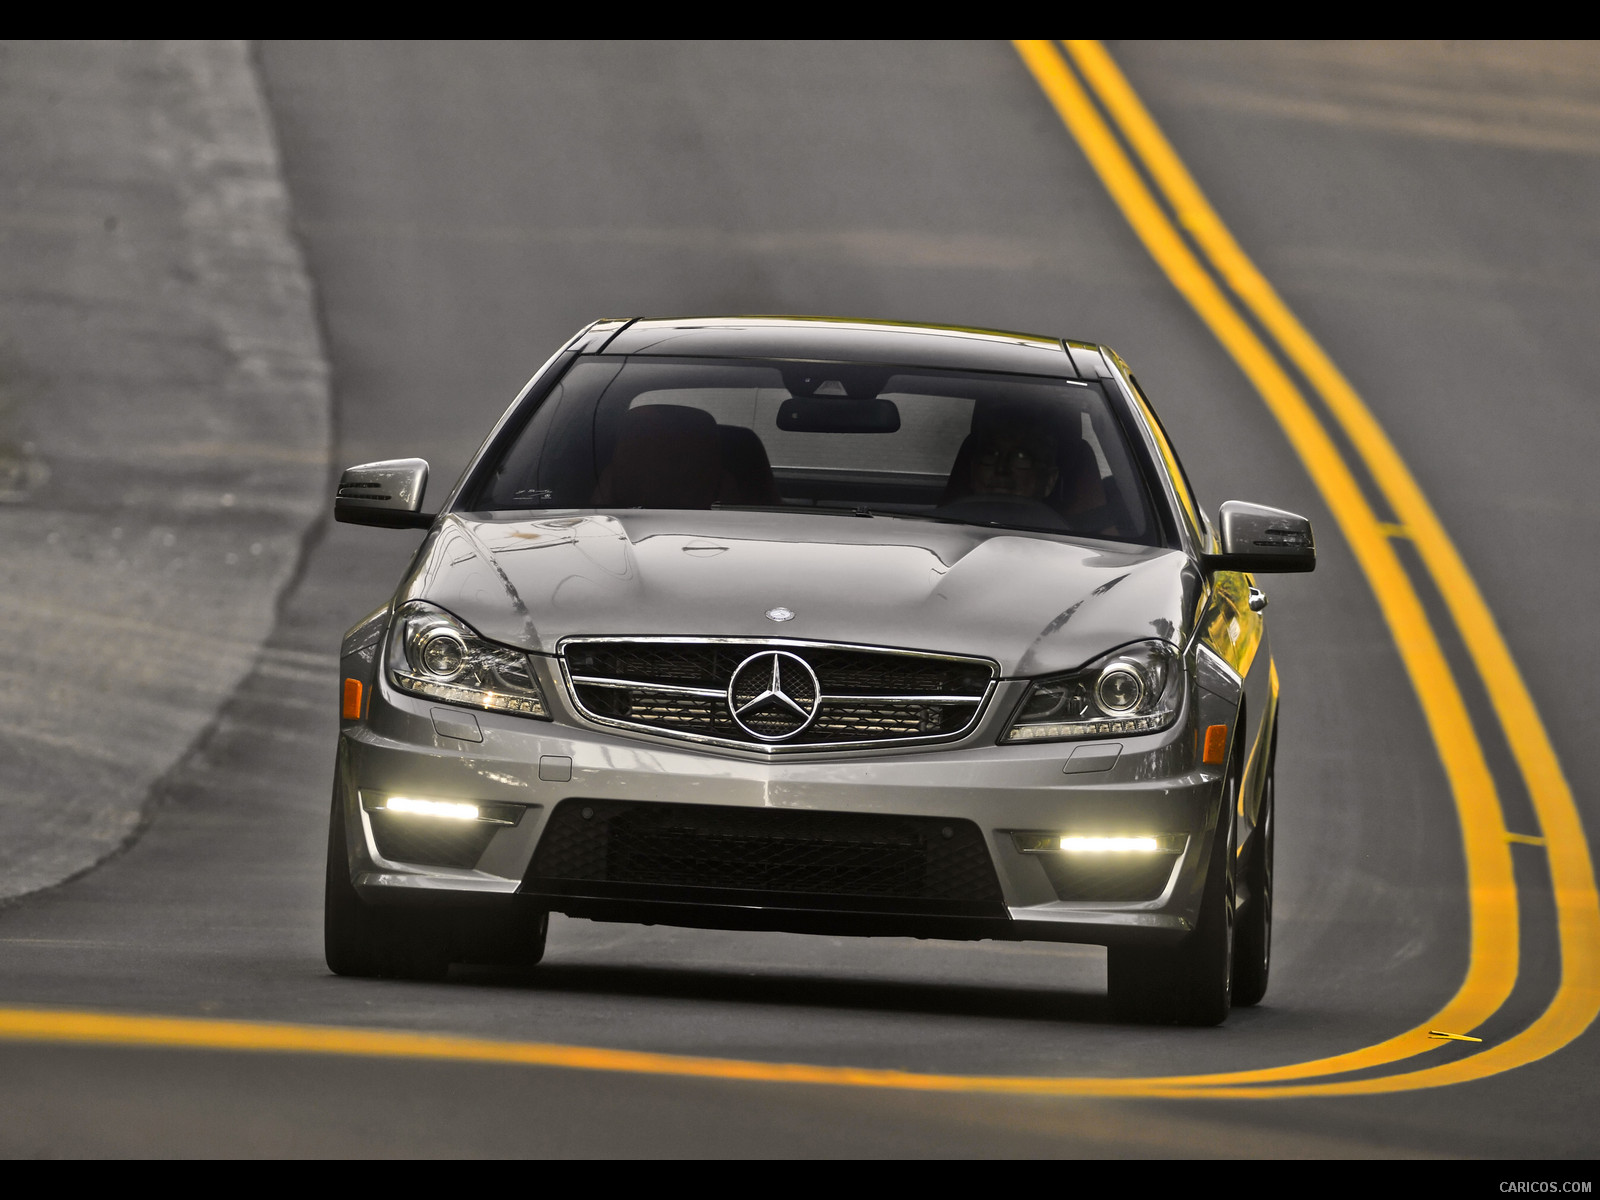 Mercedes-Benz C63 AMG Coupe (2012) with MCT transmission - , #19 of 64